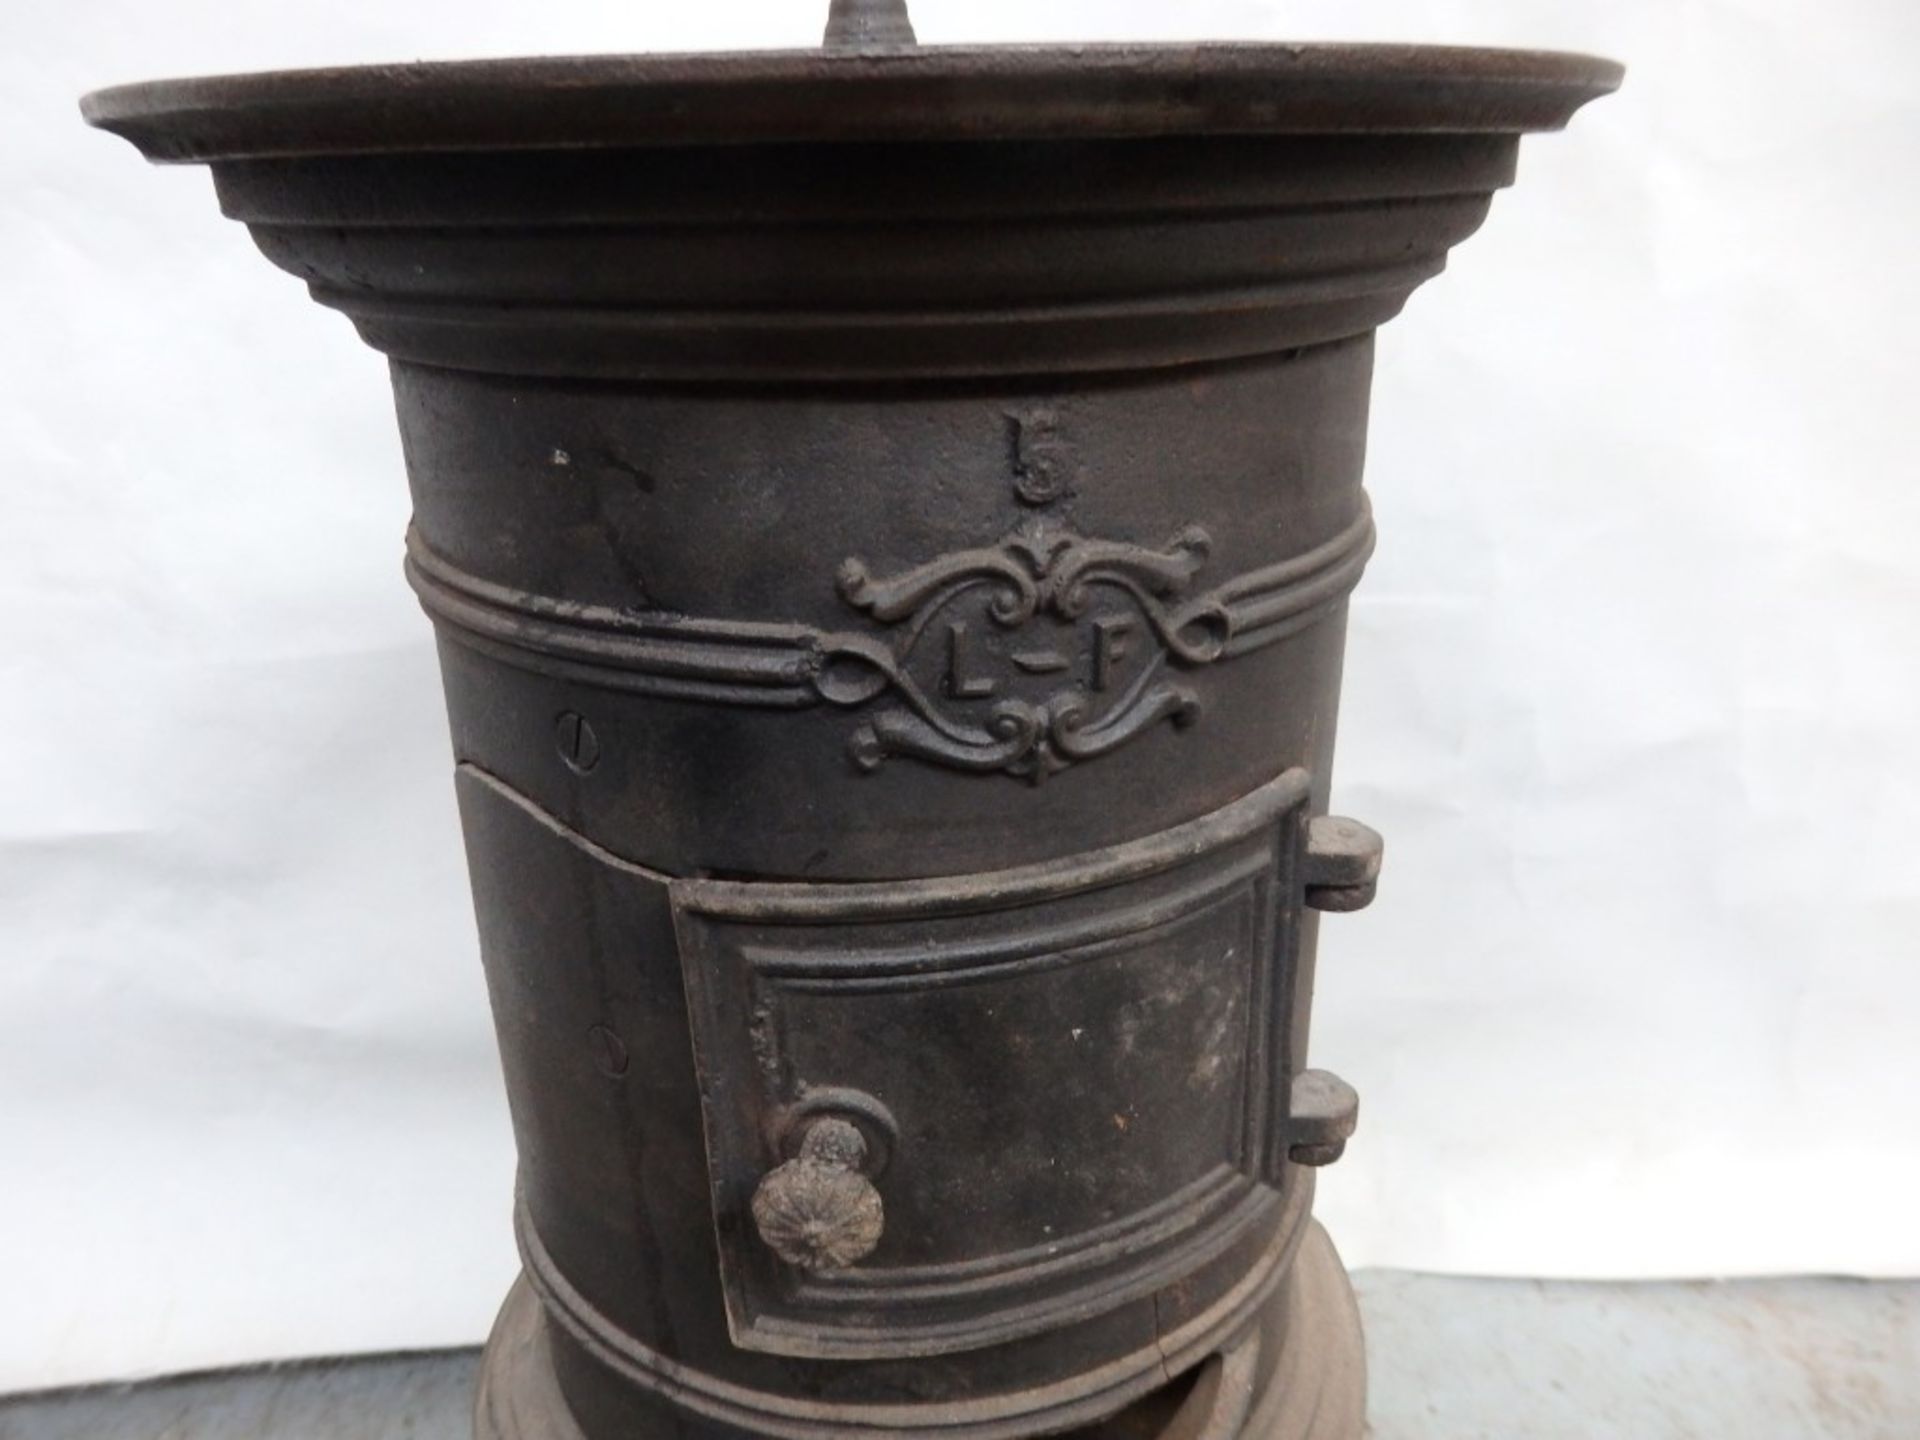 1 x Reclaimed Antique Cast Iron Potbelly Wood Burner / Stove - Dimensions: H61, Diameter 30cm - - Image 8 of 9